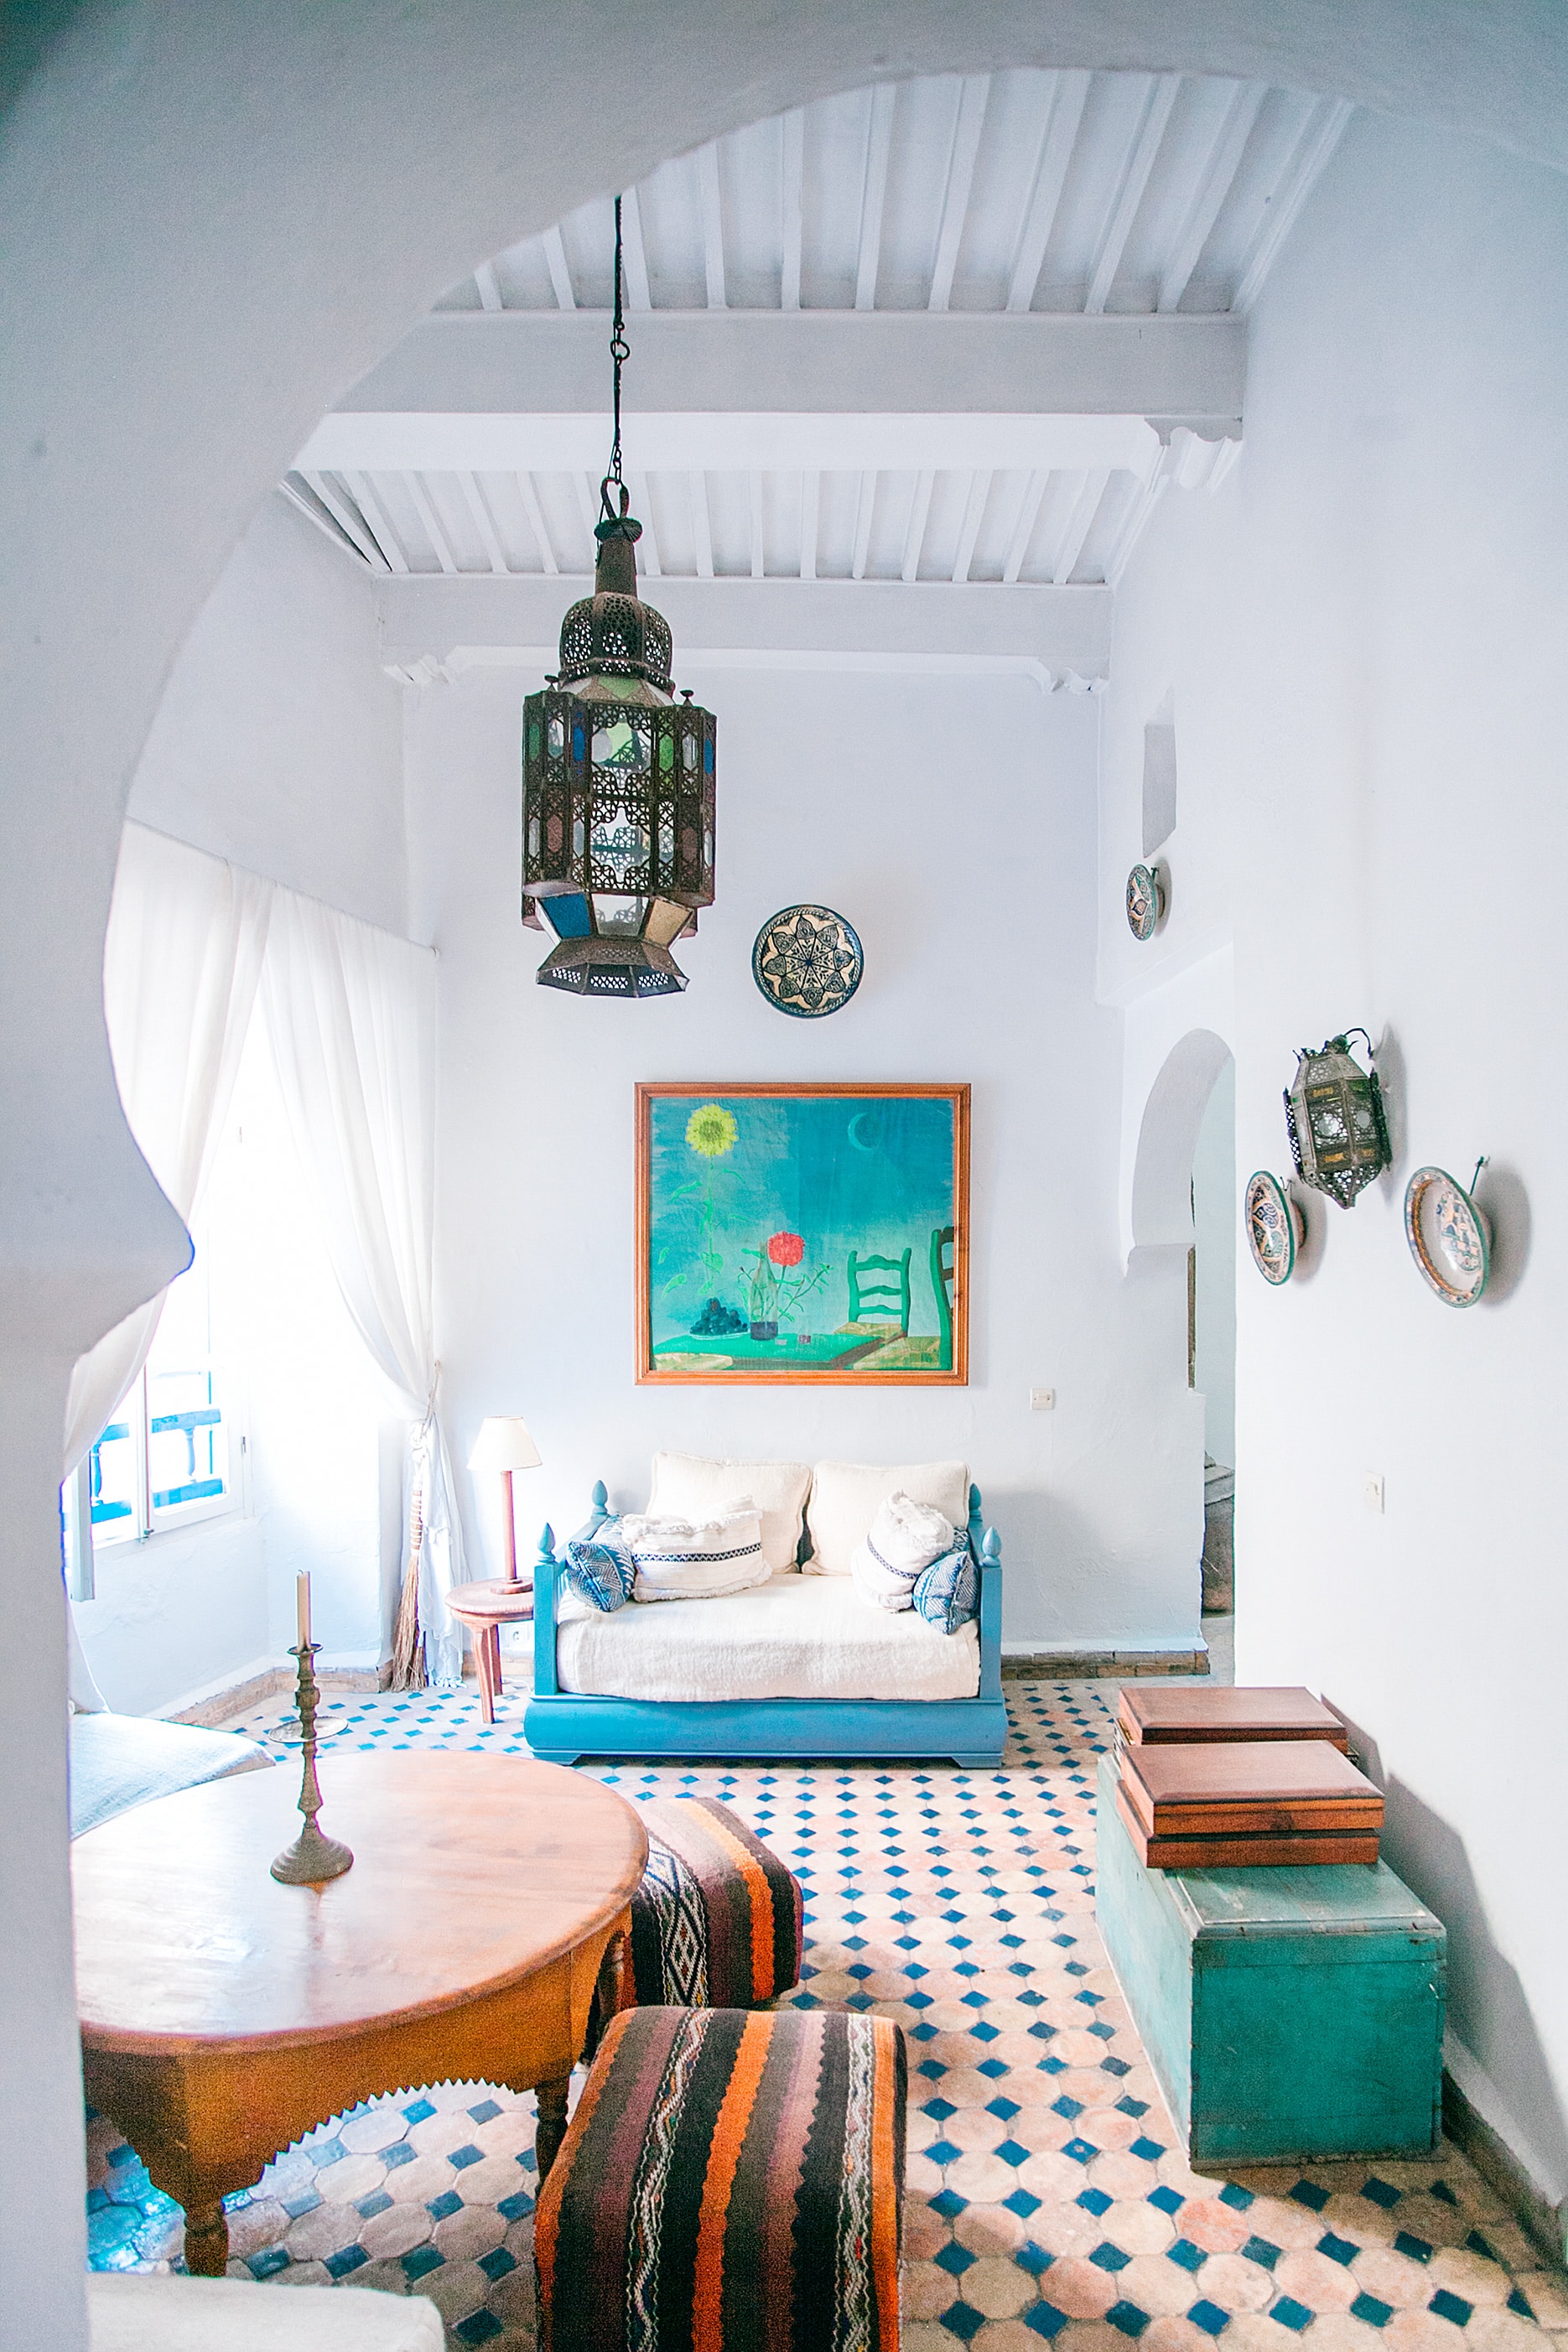 Colourful, accorded to local weather, touchable details in Moroccan interior